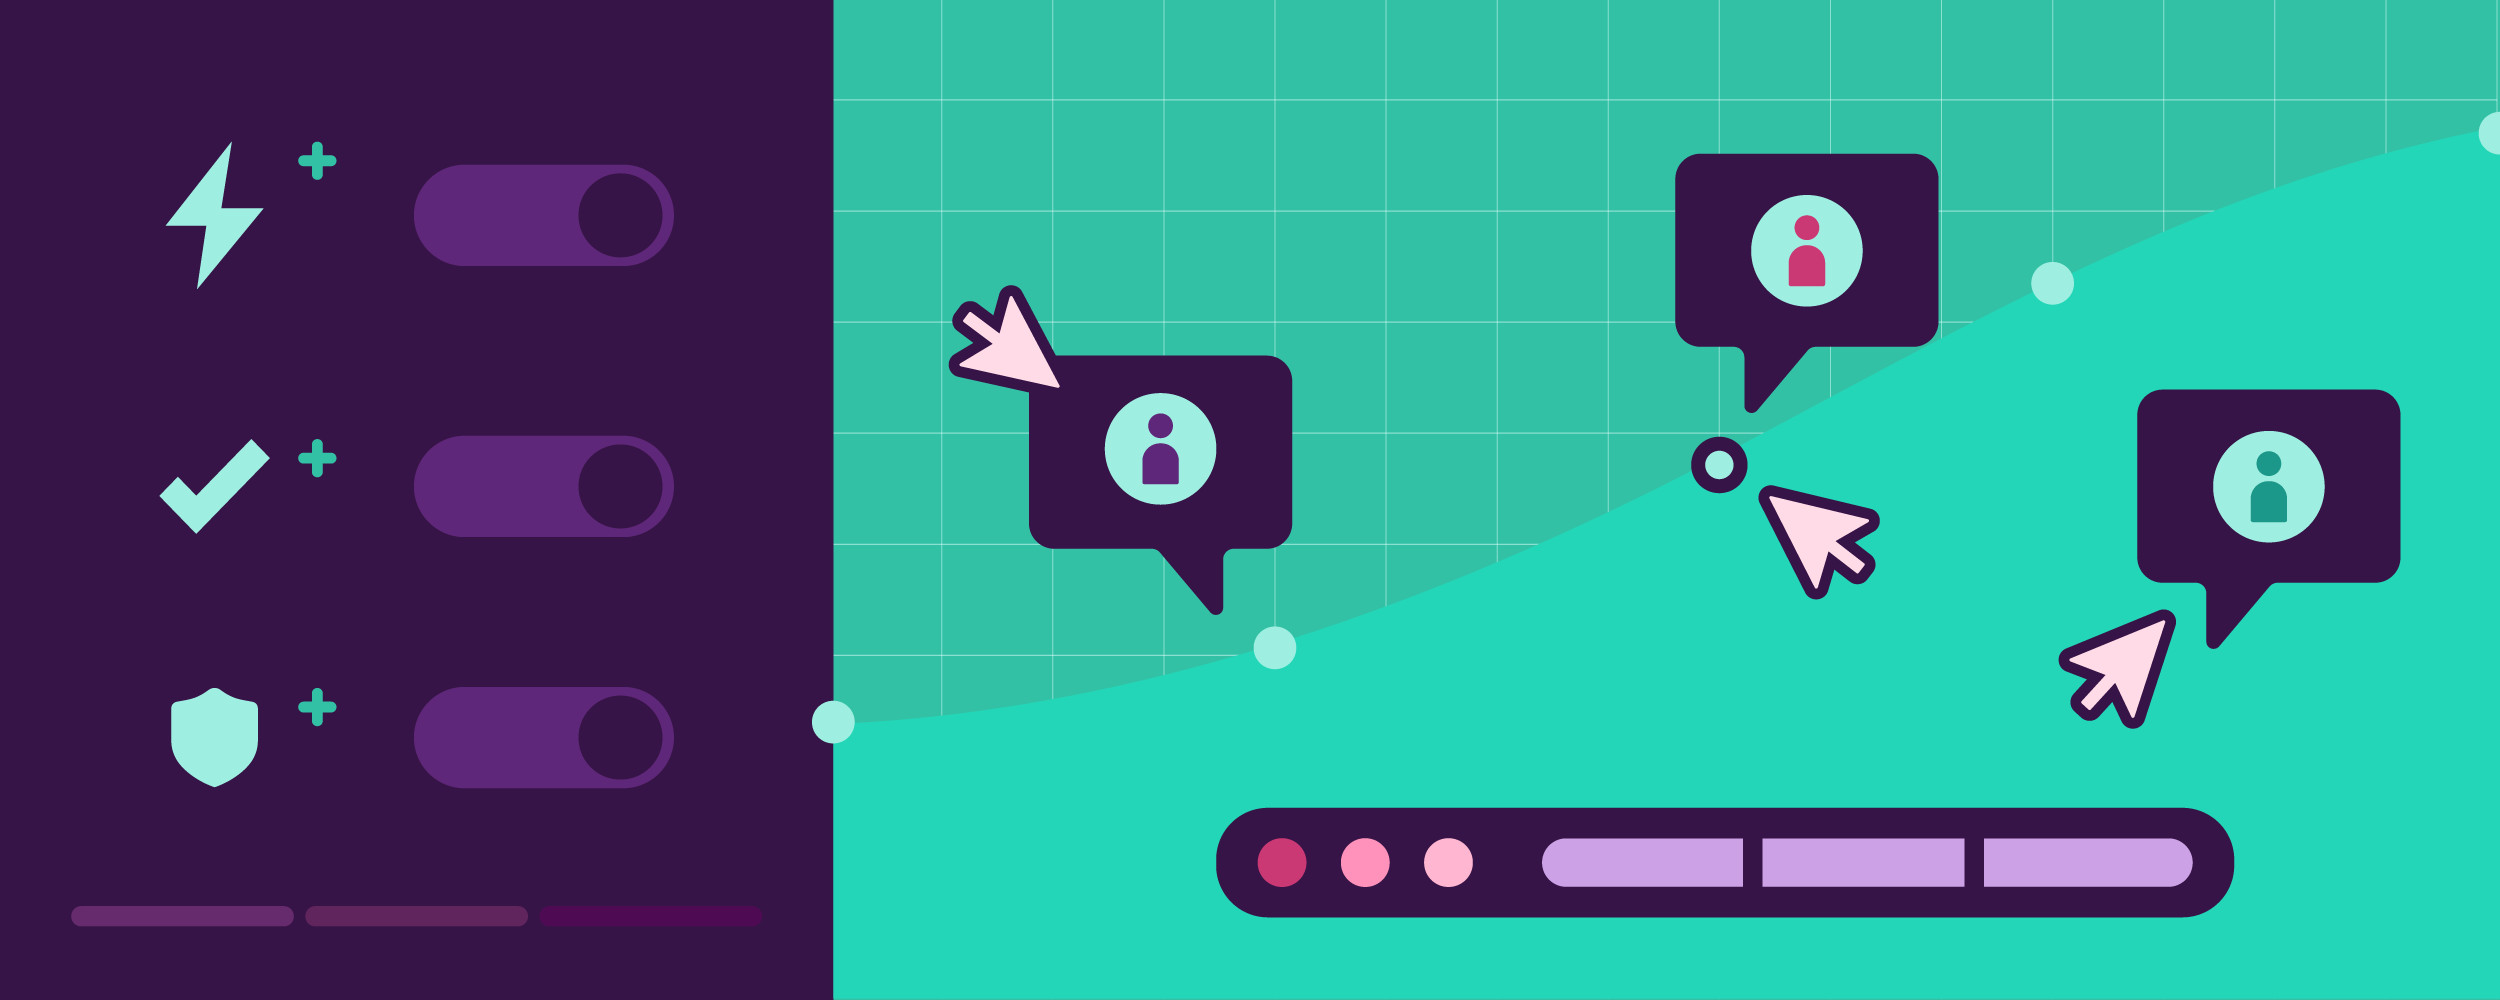 Illustration: Three mint green icons with plus signs and three purple toggle buttons are switched on next to a graph charting three purple chat boxes with multicolored silhouettes of people trending upward signaling Ally's digital transformation. 